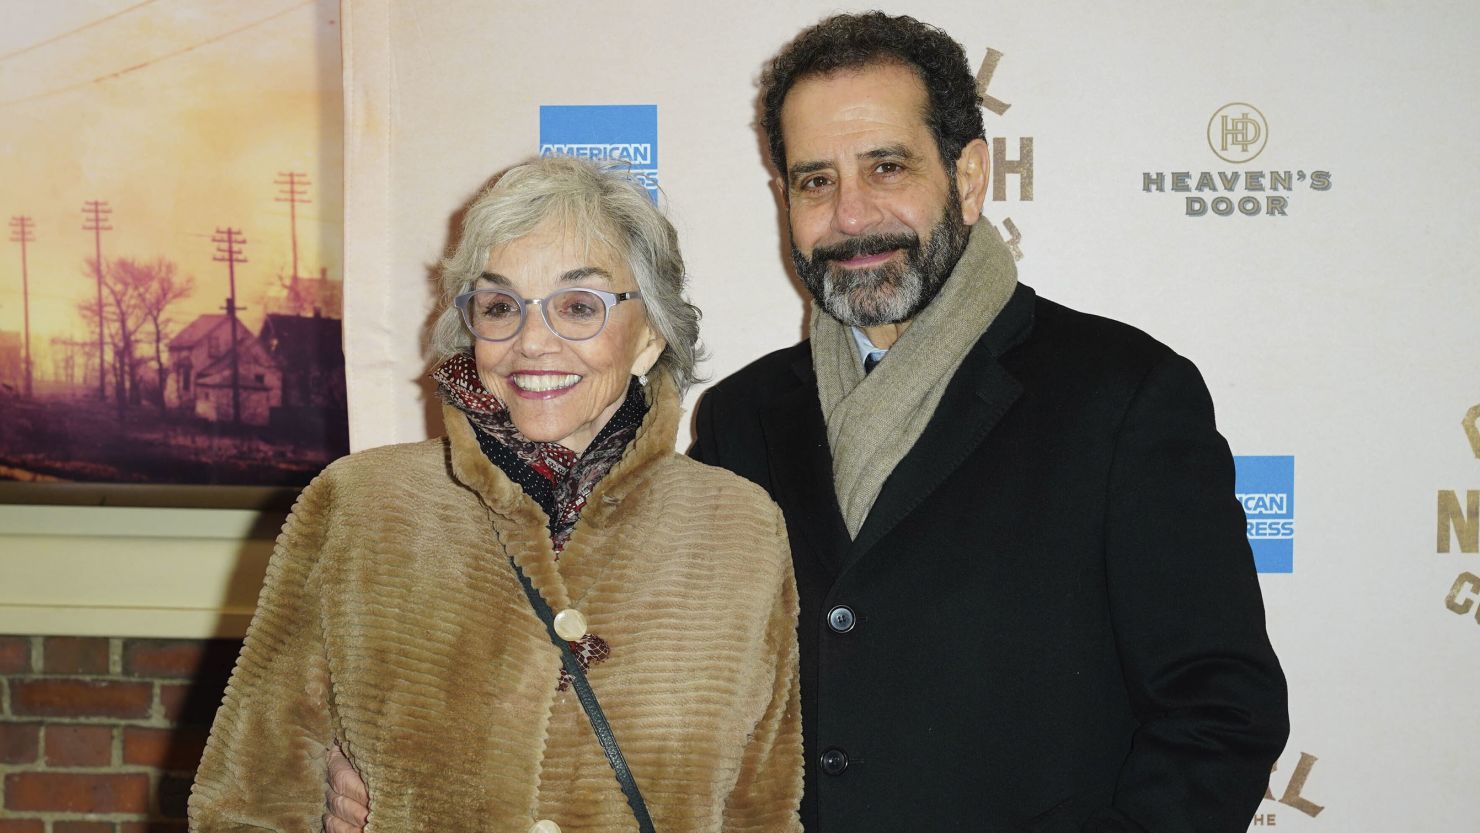 Tony Shalhoub, right, with his wife Brooke Adams at "Girl From The North Country" Broadway opening at the Belasco Theatre in New York City.